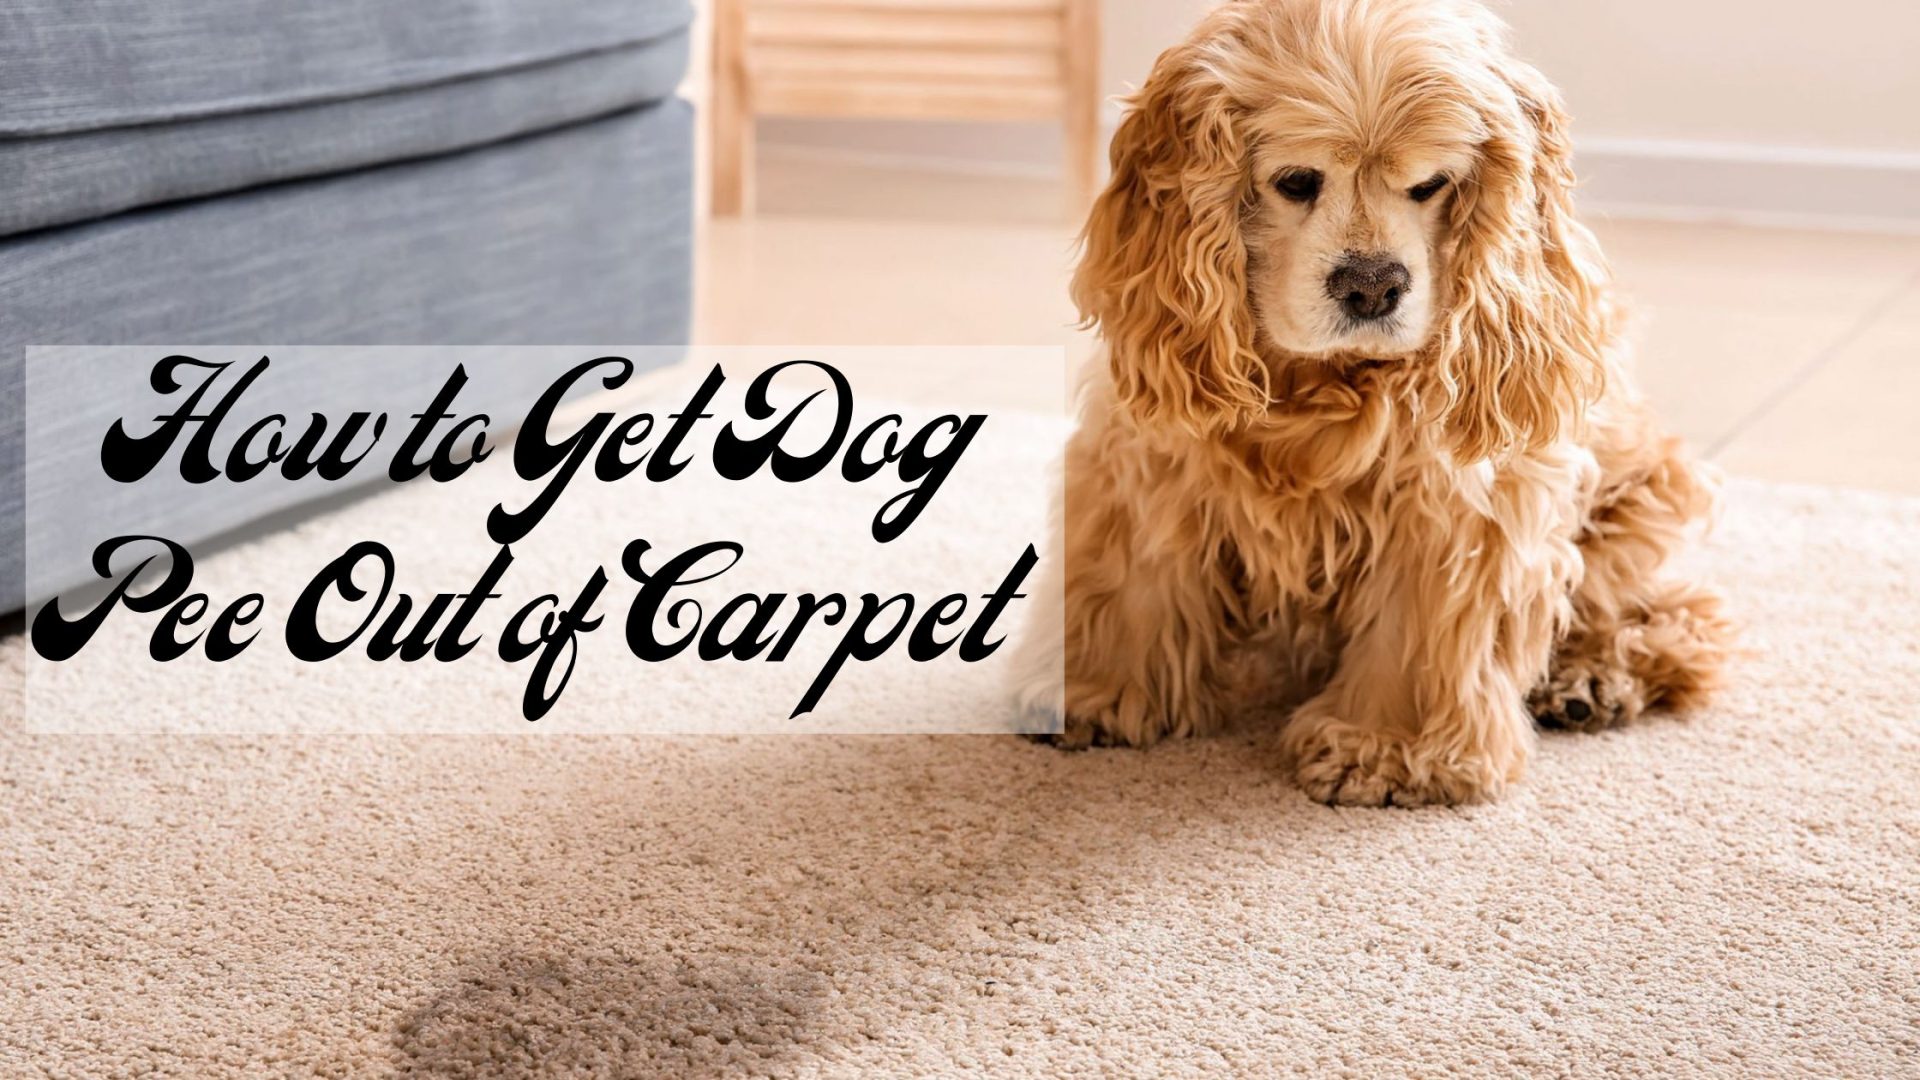 How to Get Dog Pee Out of Carpet